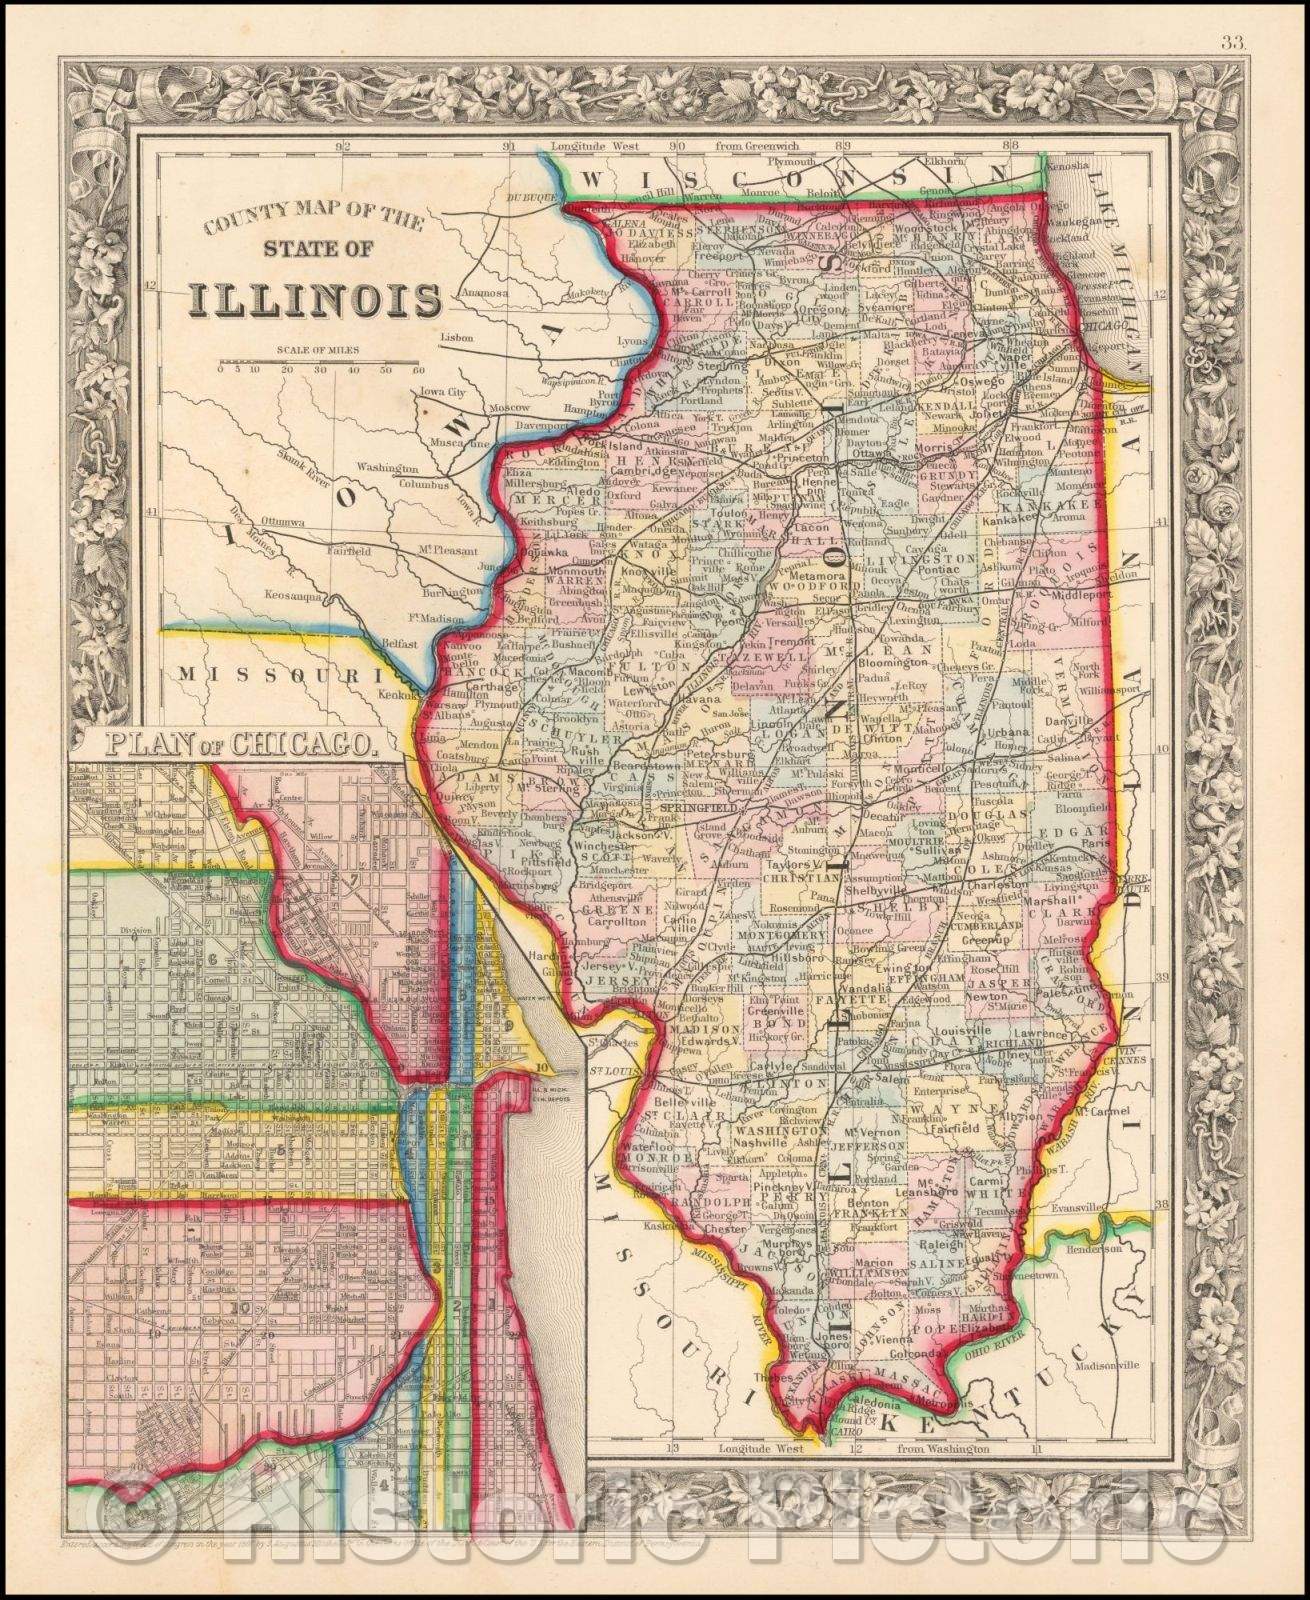 Historic Map - County Map of the State of Illinois, 1861, Samuel Augustus Mitchell Jr. v1